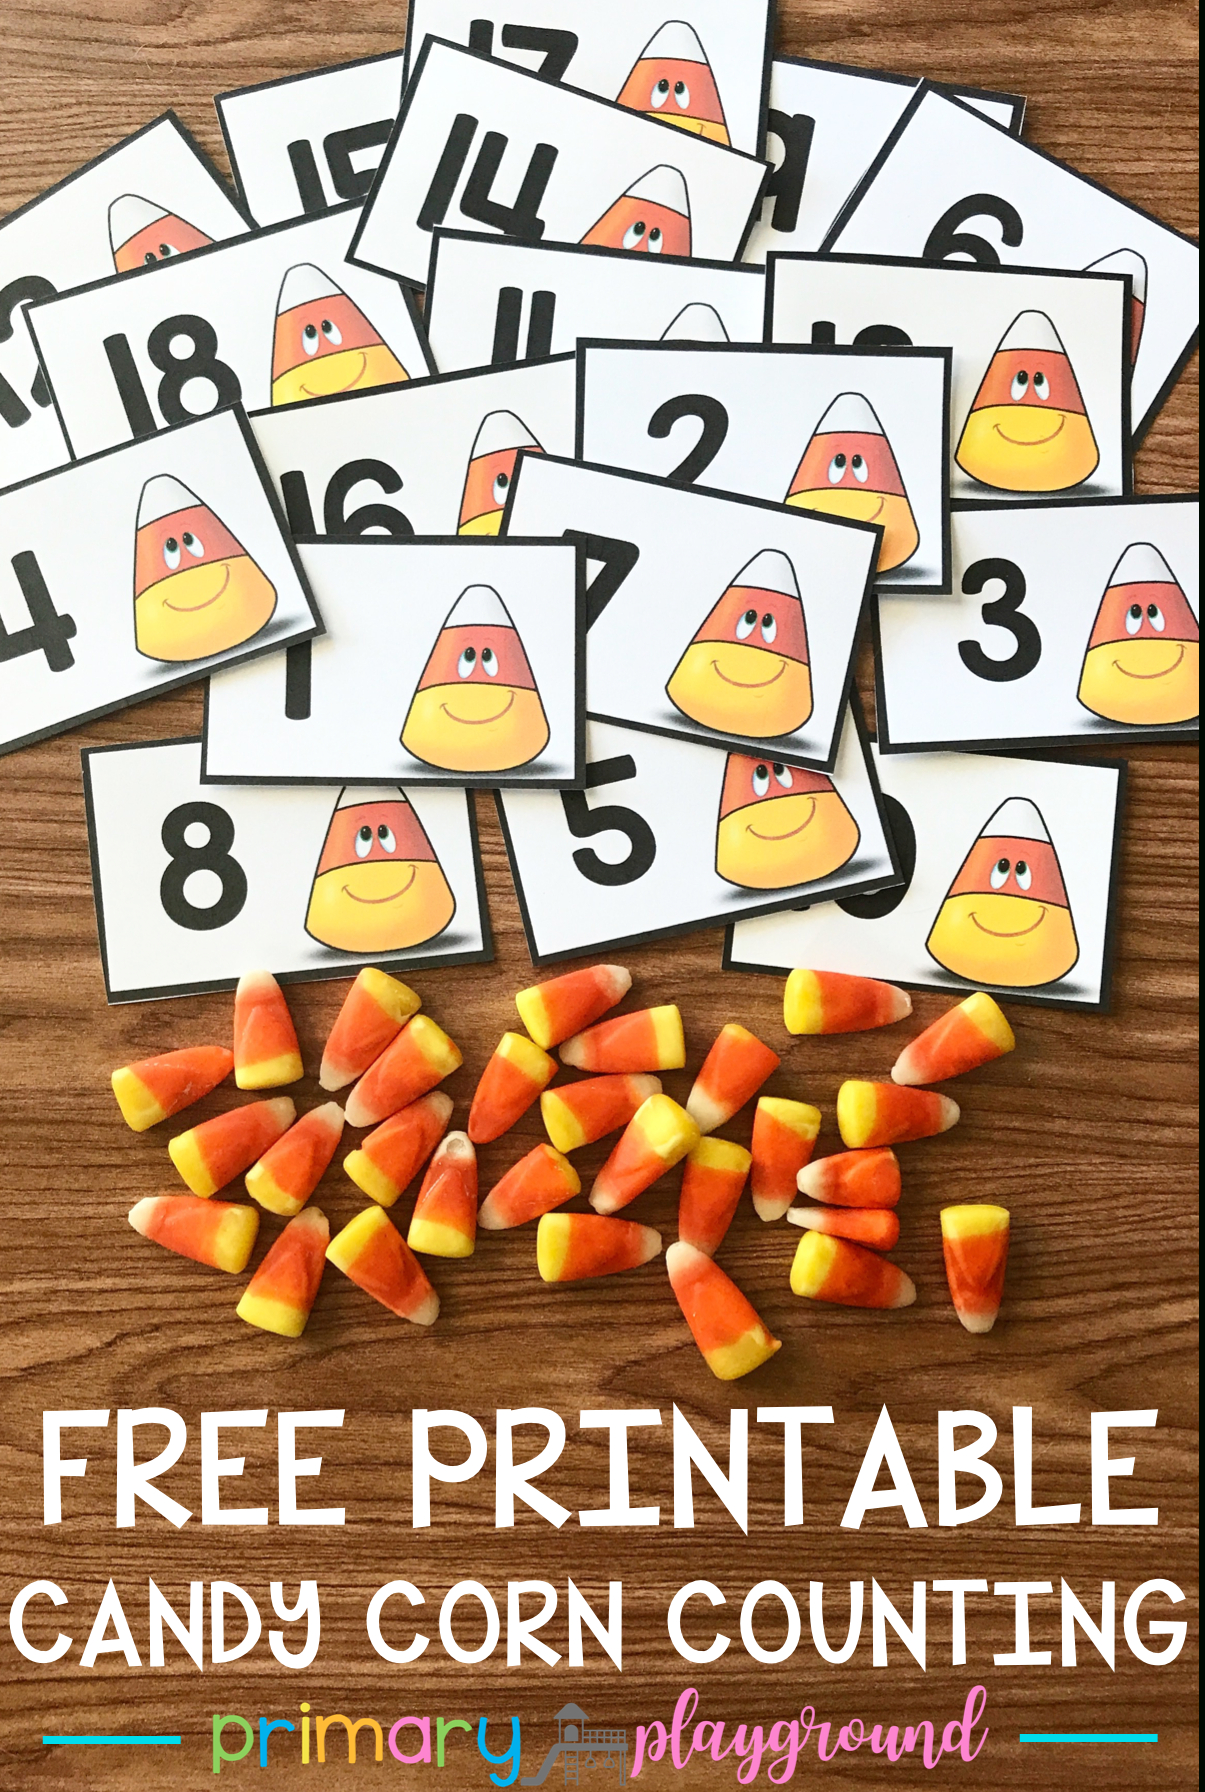 Free Printable Candy Corn Counting Cards | Teacher Stuff | Halloween - Free Printable Candy Corn